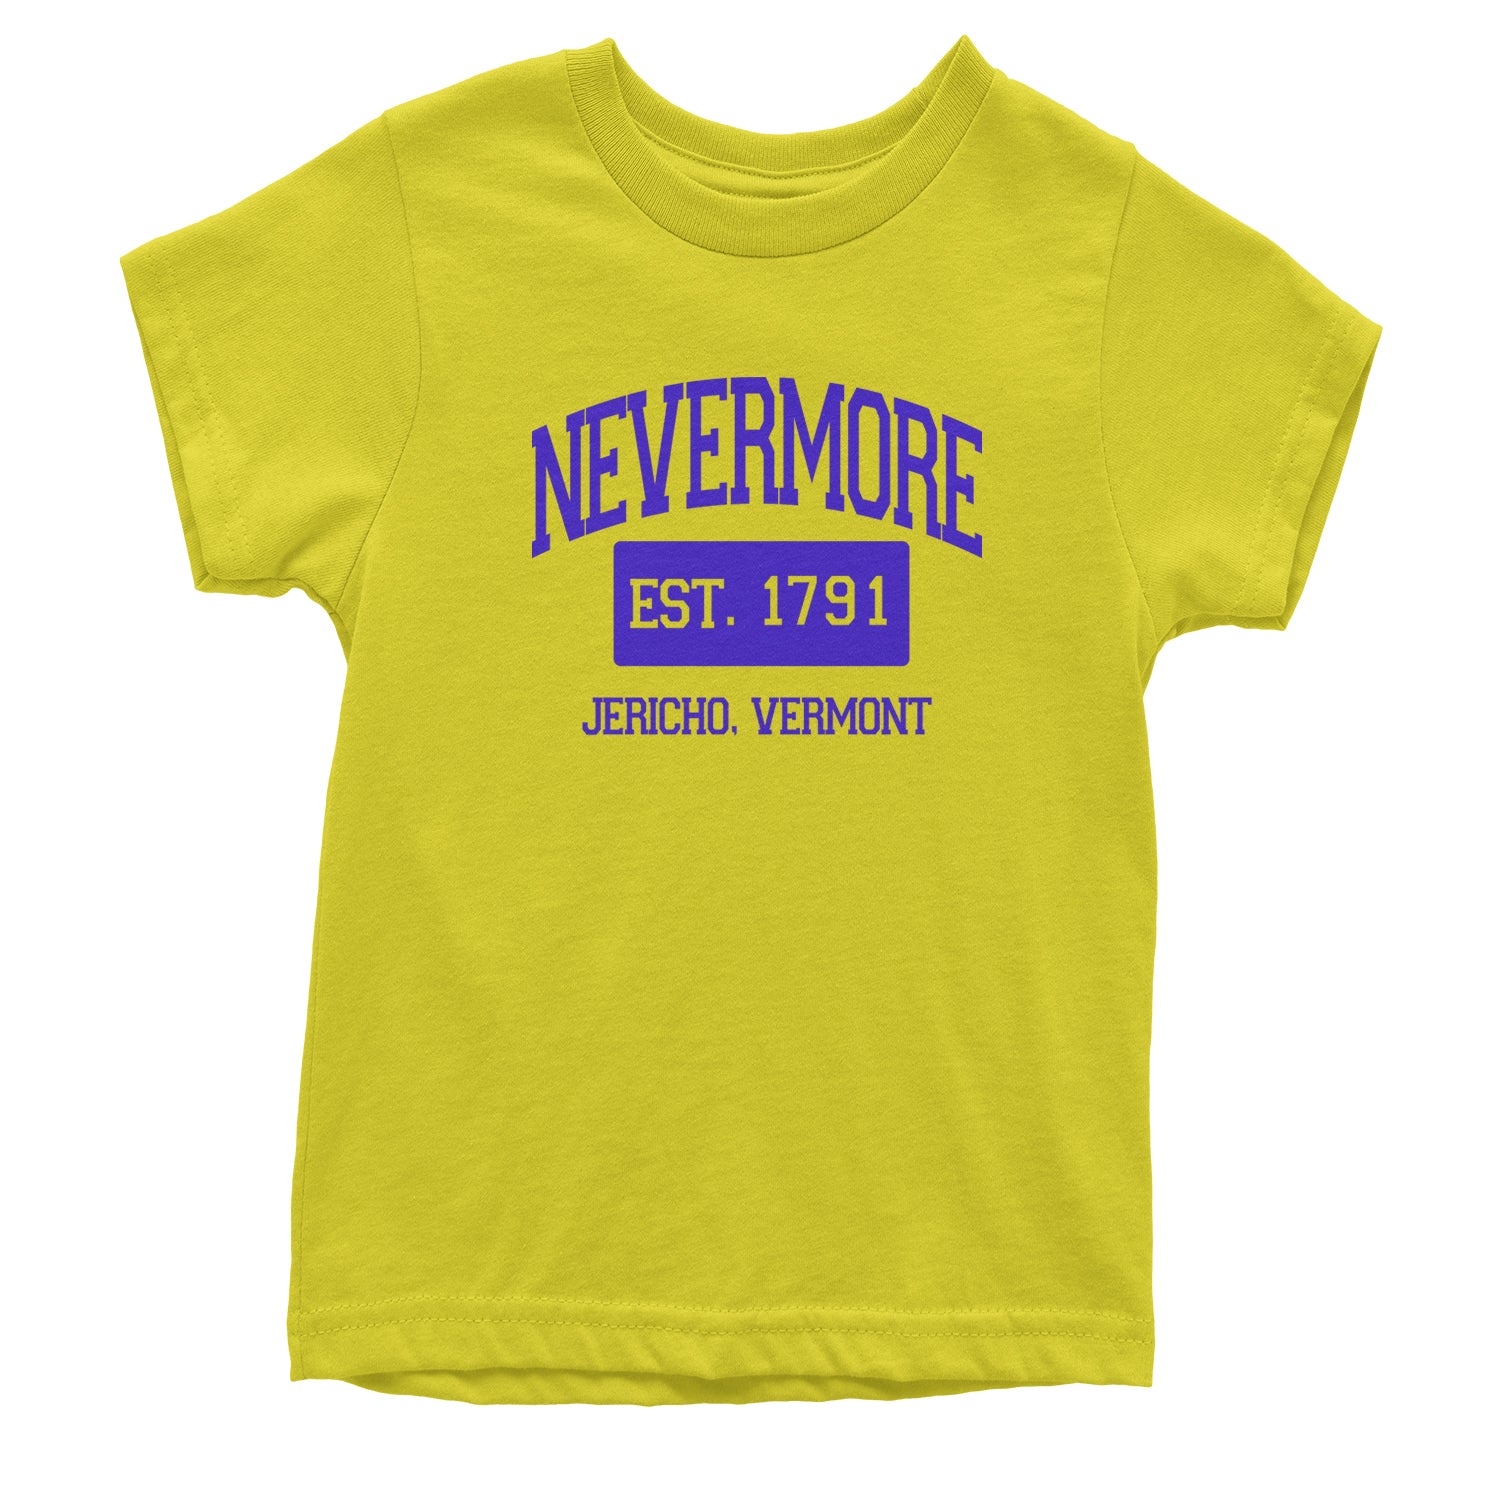 Nevermore Academy Wednesday Youth T-shirt addams, family, gomez, morticia, pugsly, ricci, Wednesday by Expression Tees